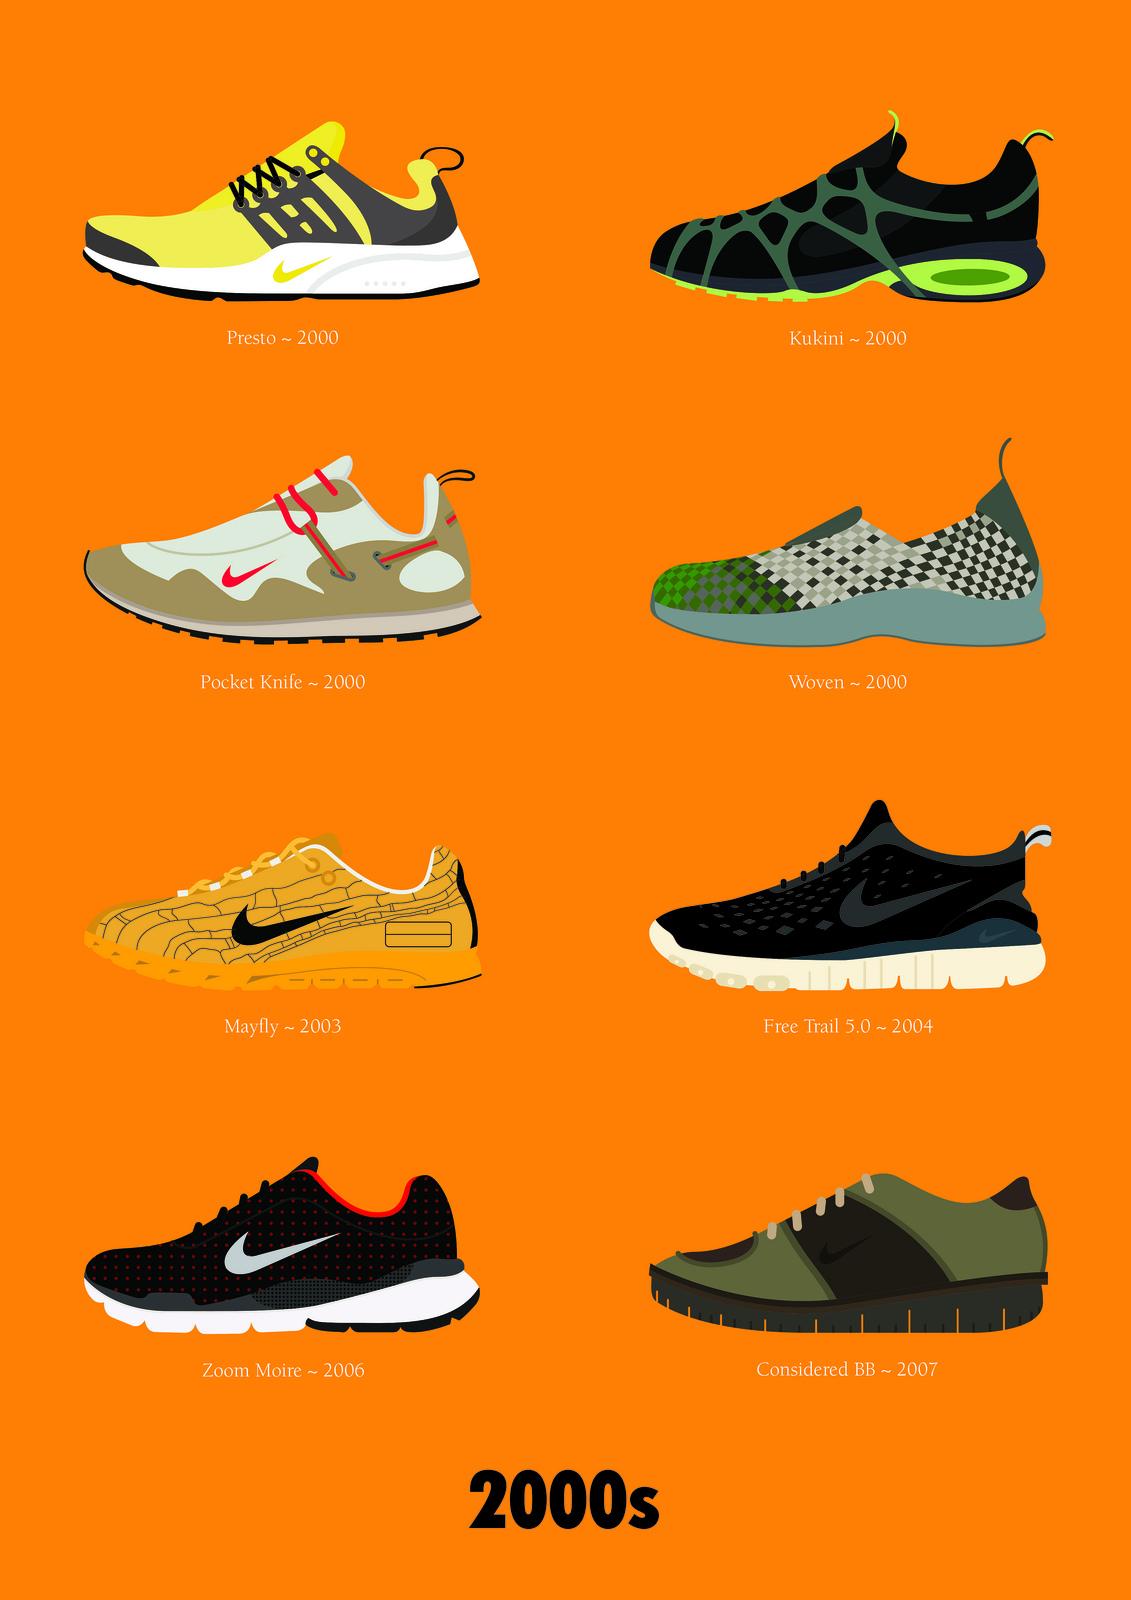 40 Years Of Nike’s Most Iconic Shoe Designs, Visualised